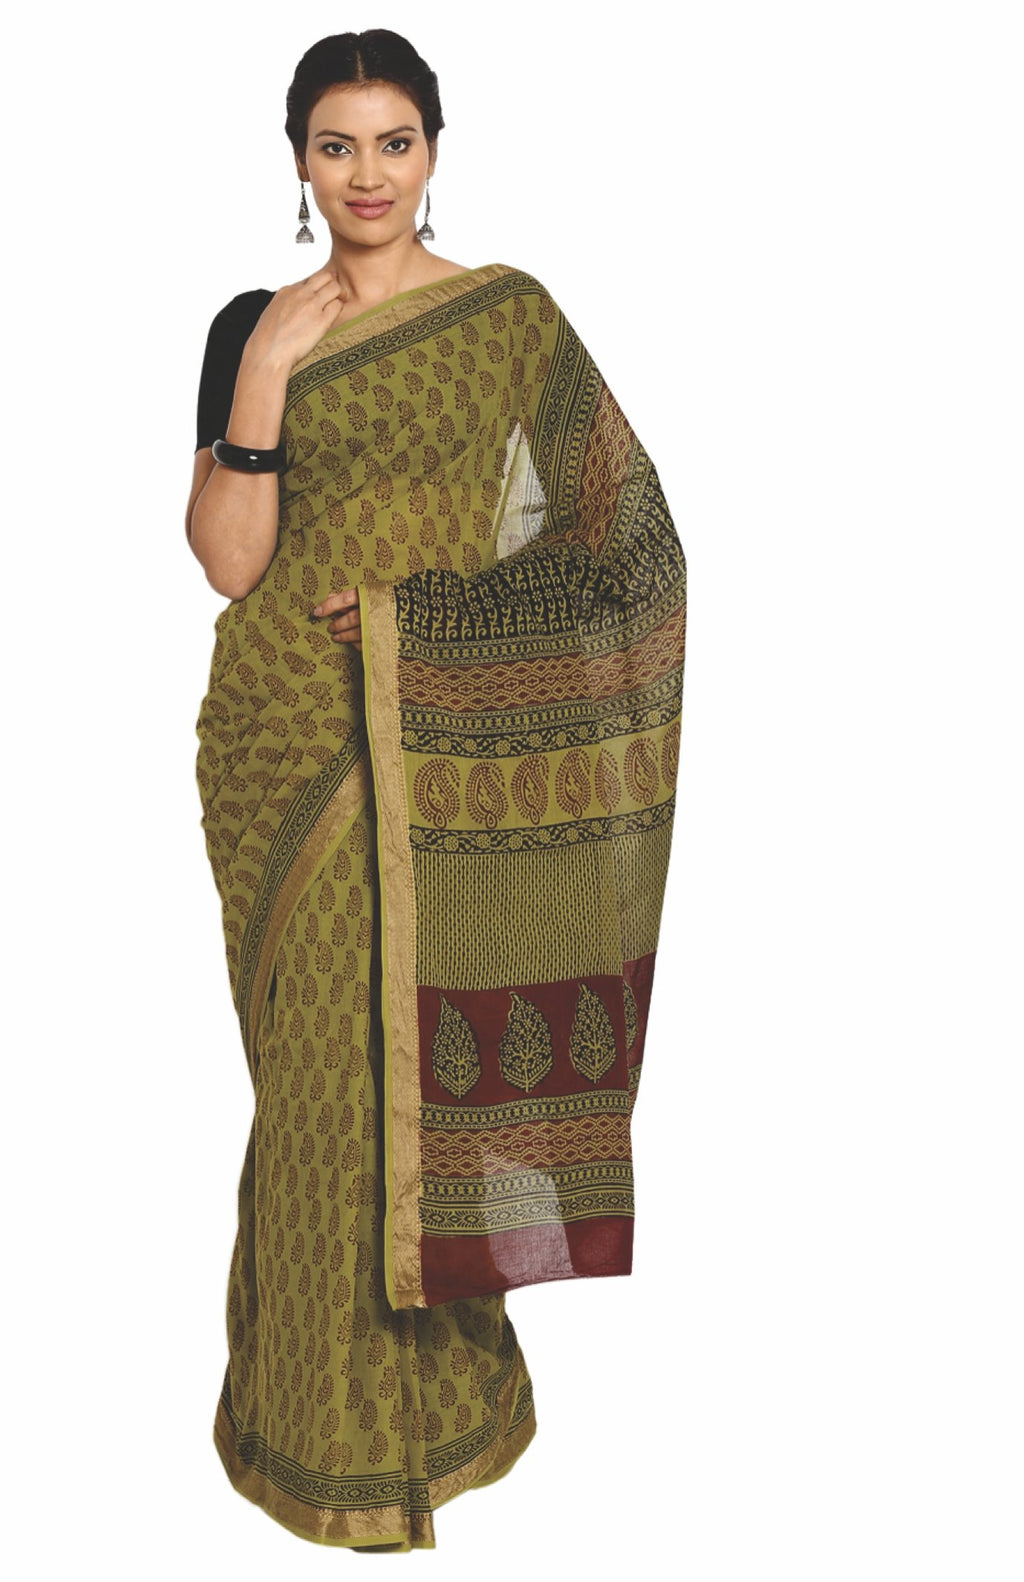 Olive Green Cotton Hand Block Bagh Print Handcrafted Saree-Saree-Kalakari India-ZIBASA0077-Bagh, Cotton, Geographical Indication, Hand Blocks, Hand Crafted, Heritage Prints, Natural Dyes, Sarees, Sustainable Fabrics-[Linen,Ethnic,wear,Fashionista,Handloom,Handicraft,Indigo,blockprint,block,print,Cotton,Chanderi,Blue, latest,classy,party,bollywood,trendy,summer,style,traditional,formal,elegant,unique,style,hand,block,print, dabu,booti,gift,present,glamorous,affordable,collectible,Sari,Saree,print